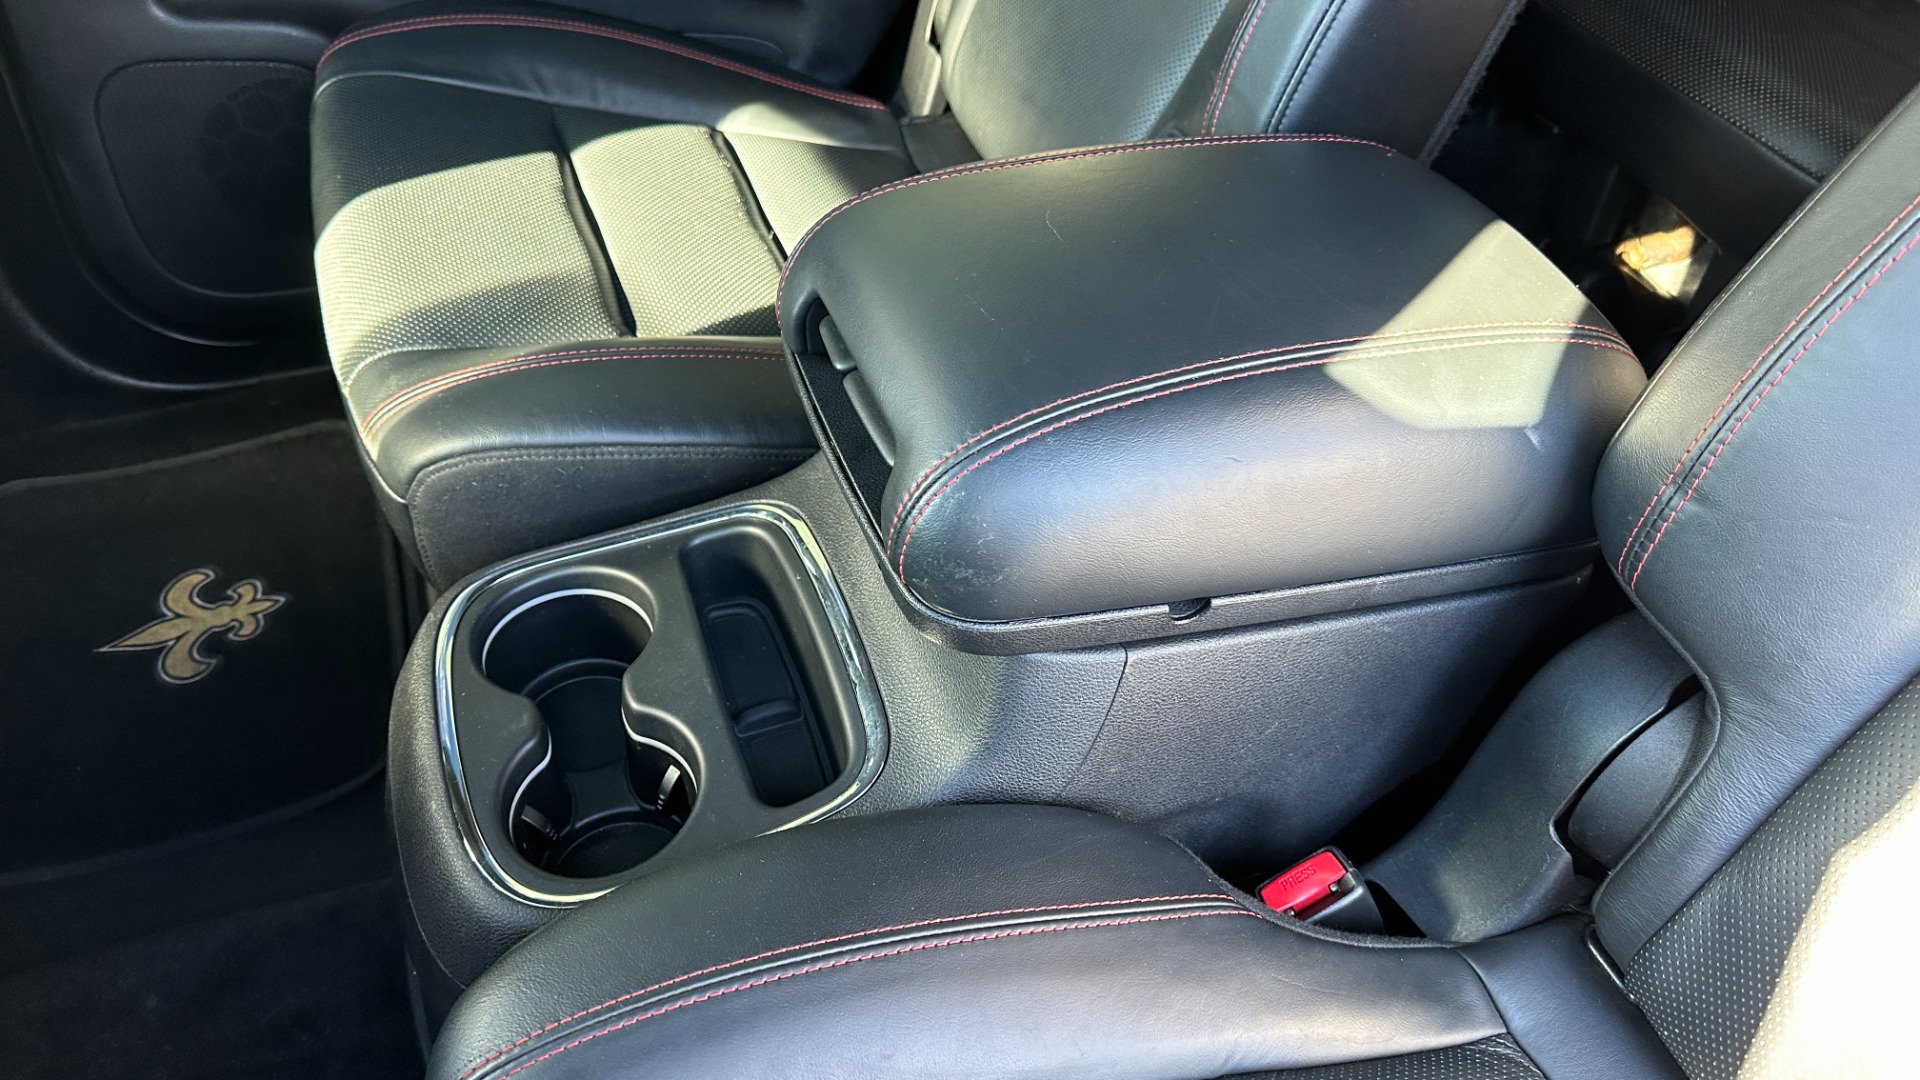 Used 2015 Dodge Durango R/T / HEMI V8 / CAPTAINS CHAIRS / 3 ROW SEATING / TECH PKG / NAPPA LEATHER  for sale $23,995 at Formula Imports in Charlotte NC 28227 28